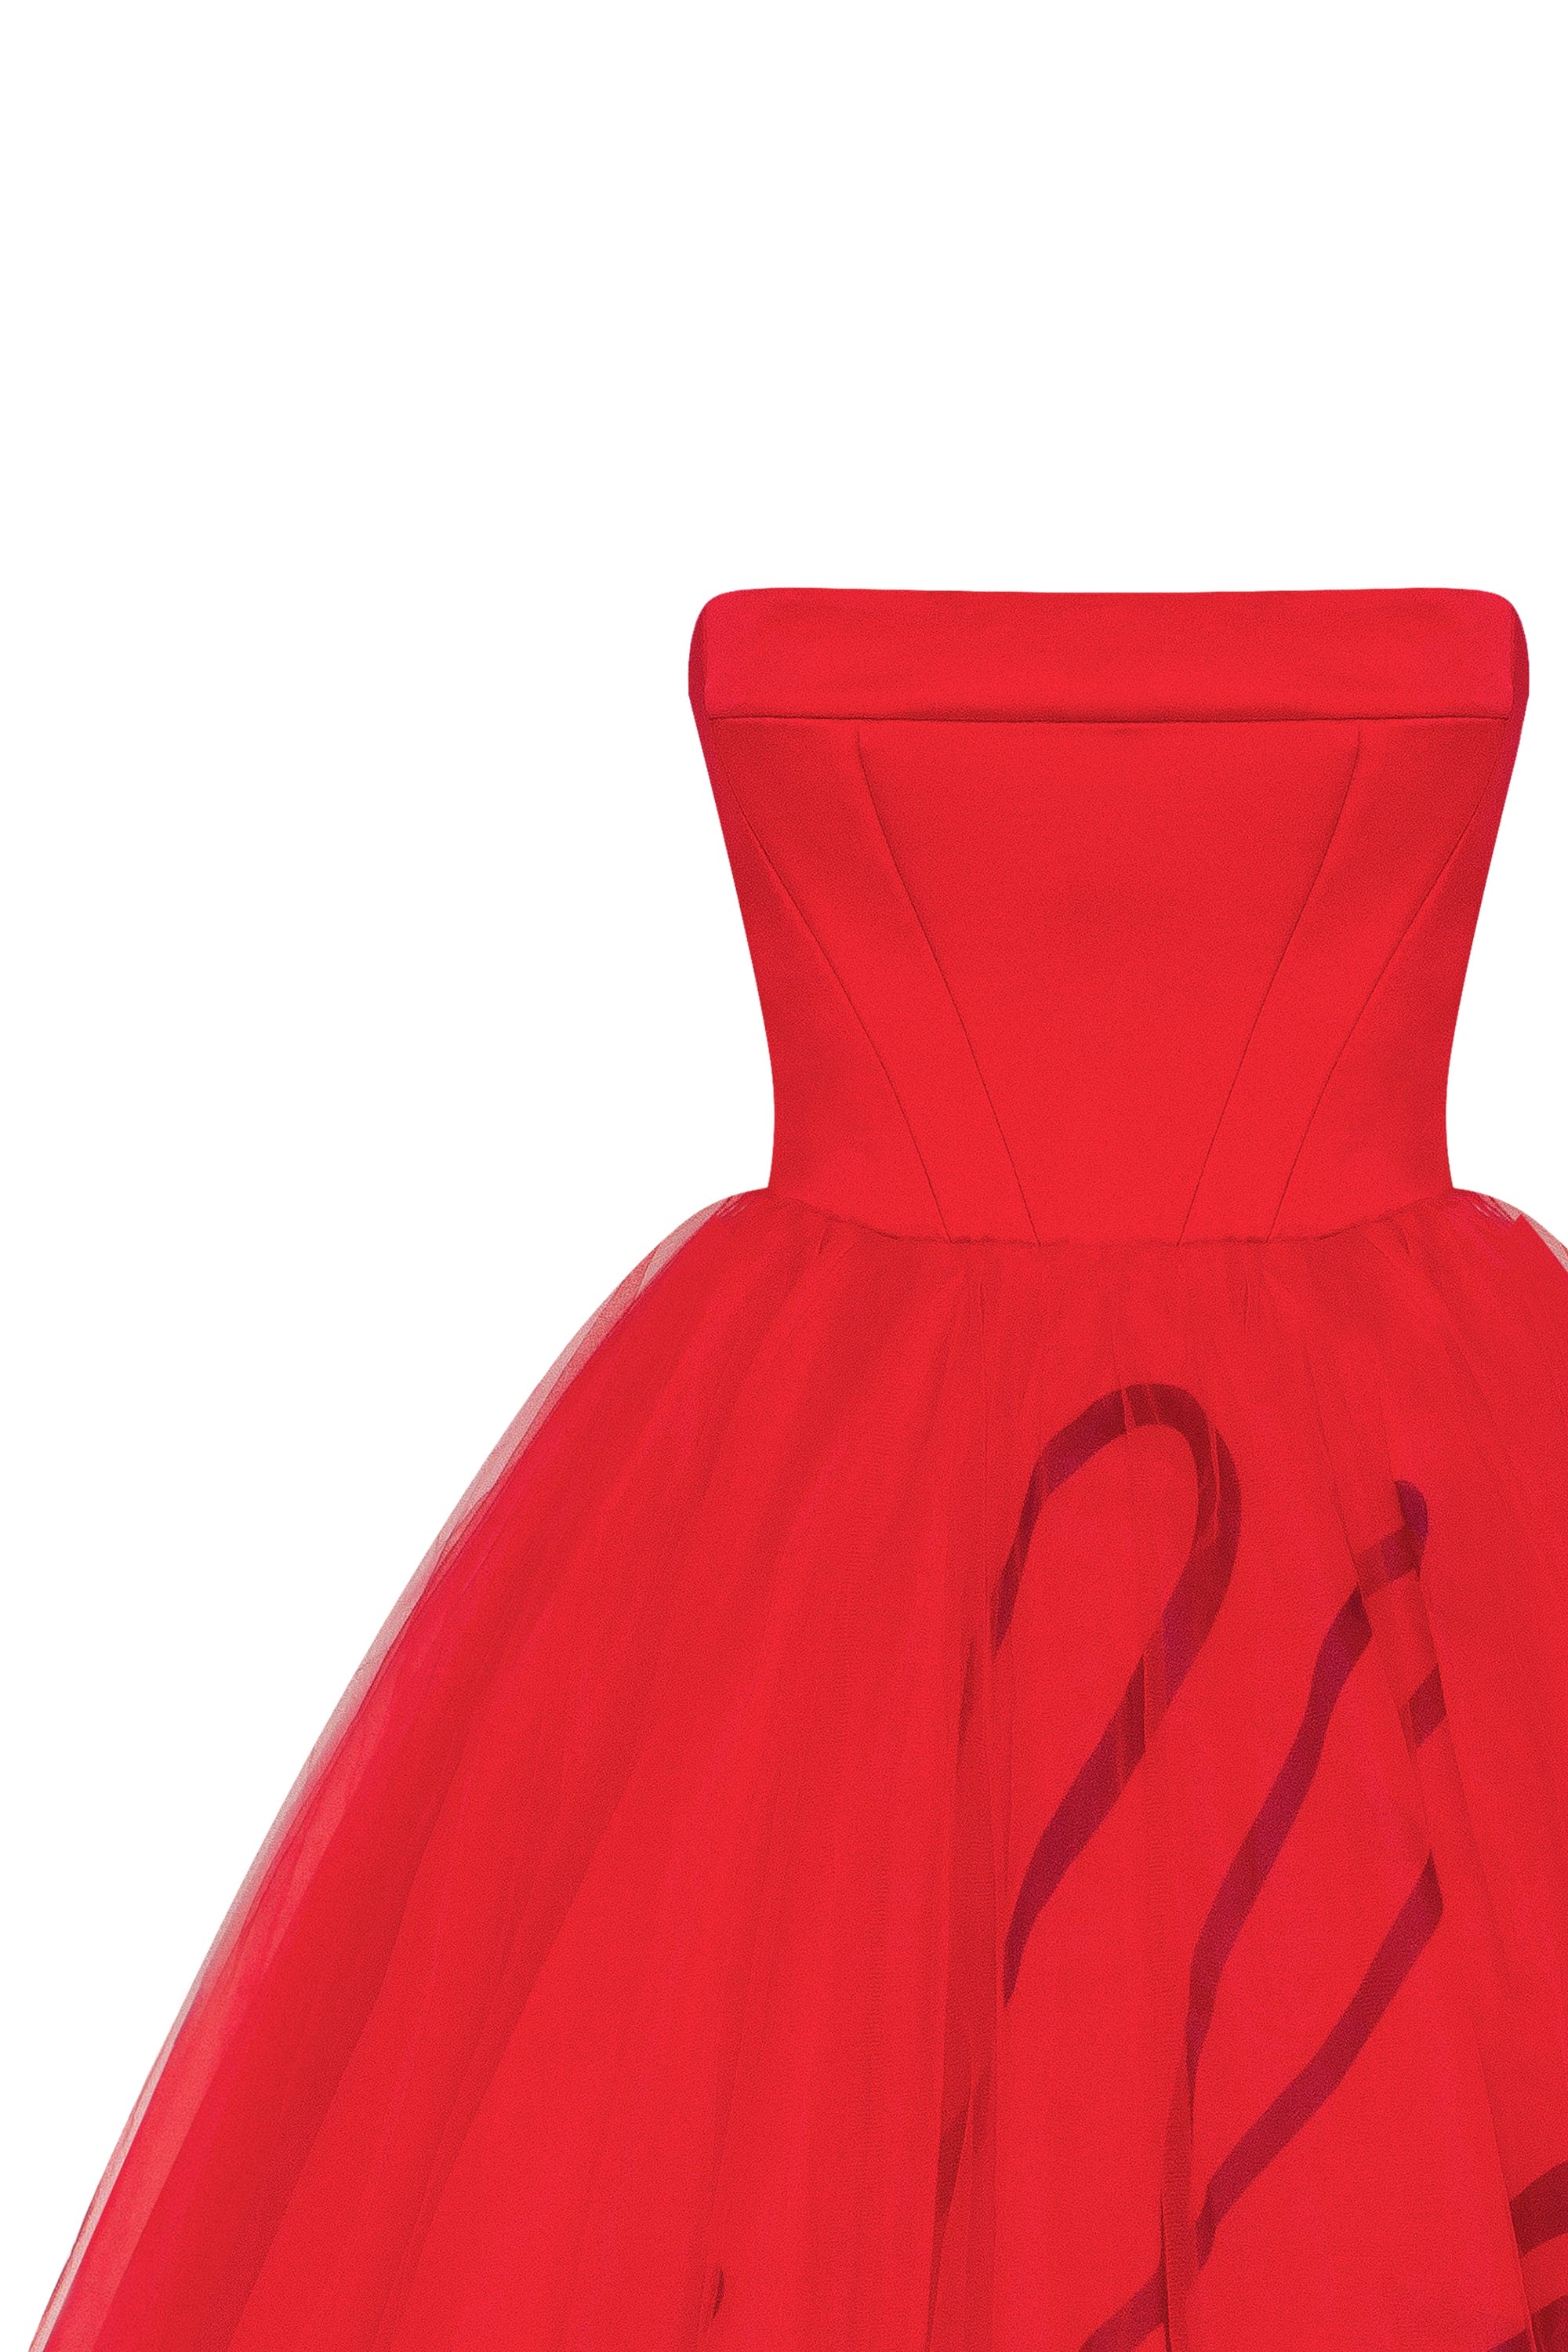 Shop Milla Dramatic Red Organza Dress Adorned With 's Signature And Black Gloves, Xo Xo